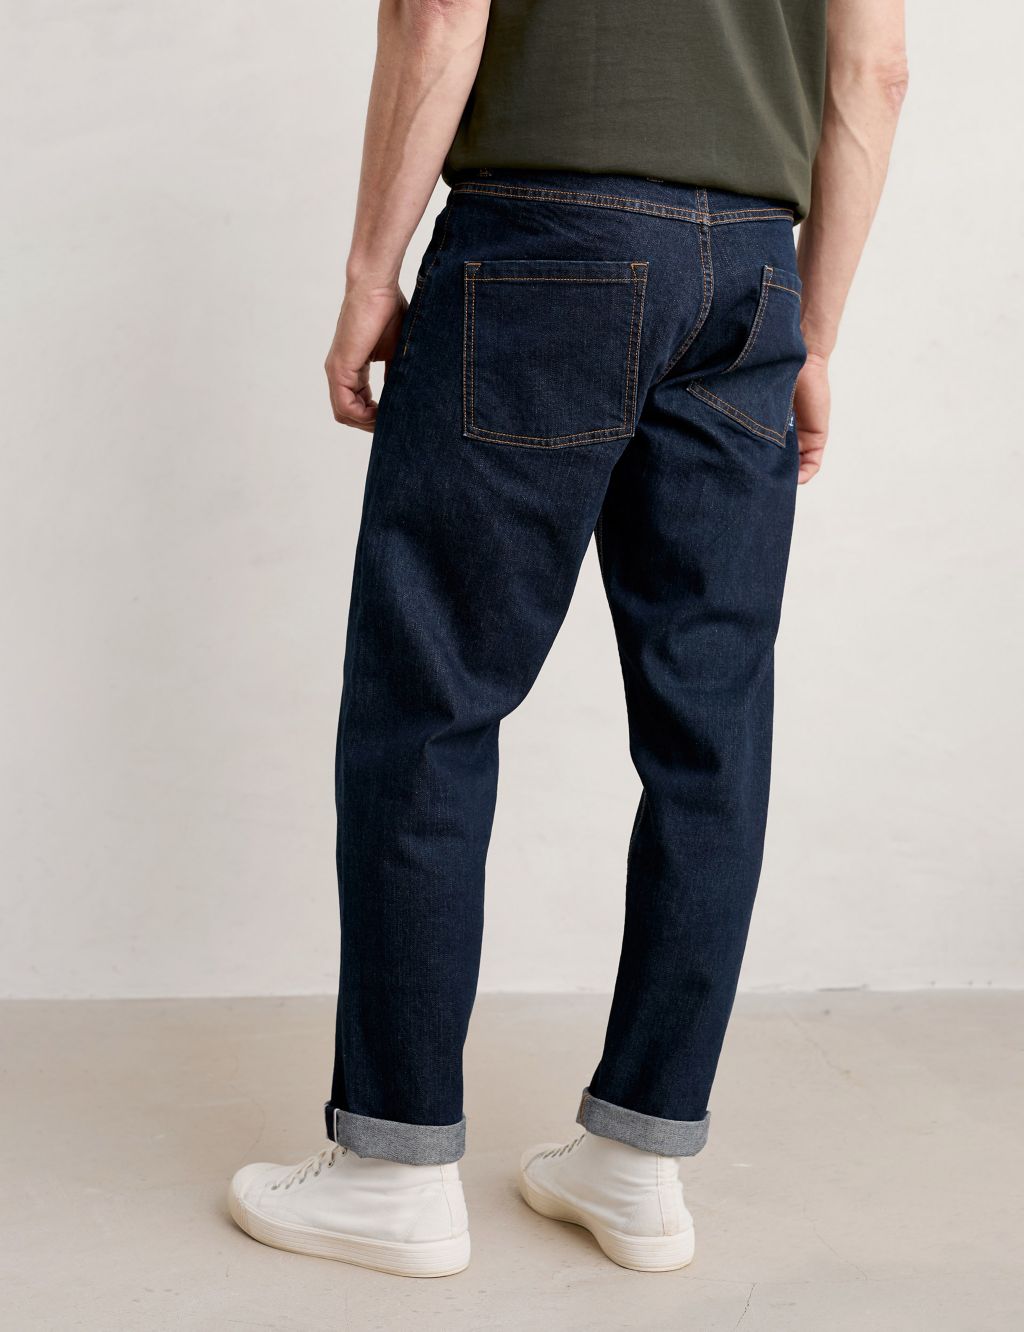 Straight Fit 5 Pocket Jeans image 4